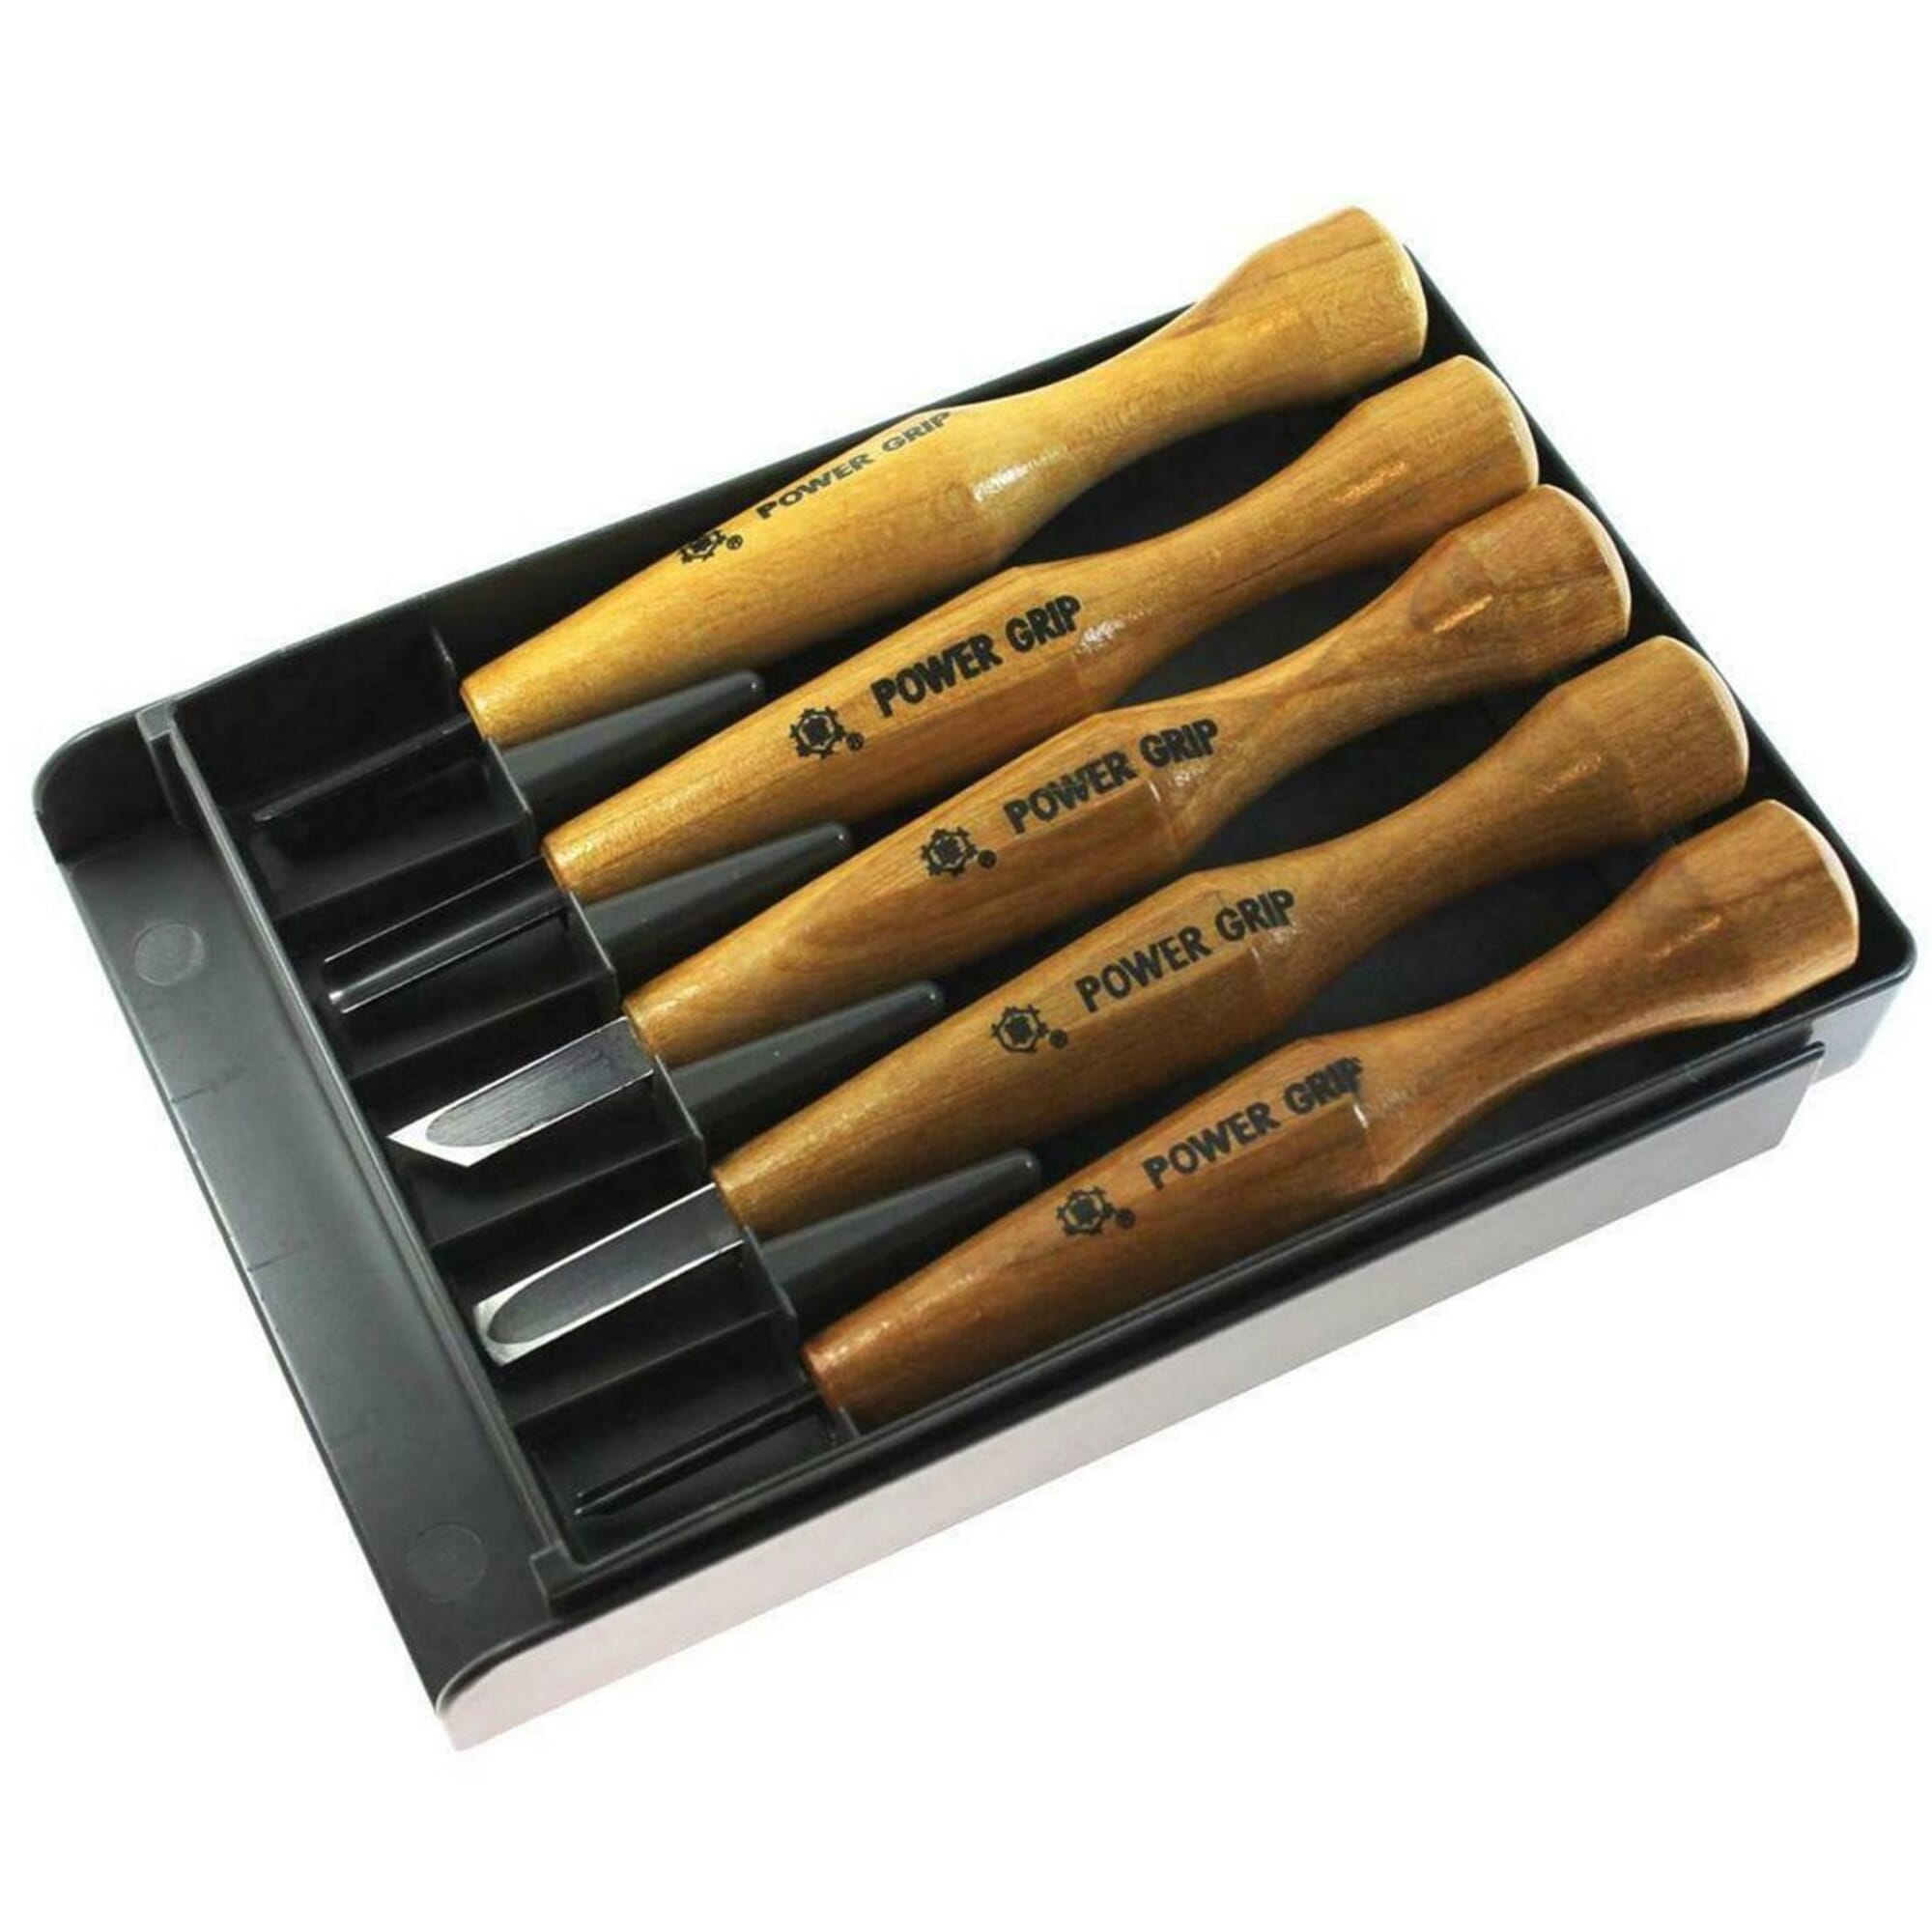 Set of carving tools